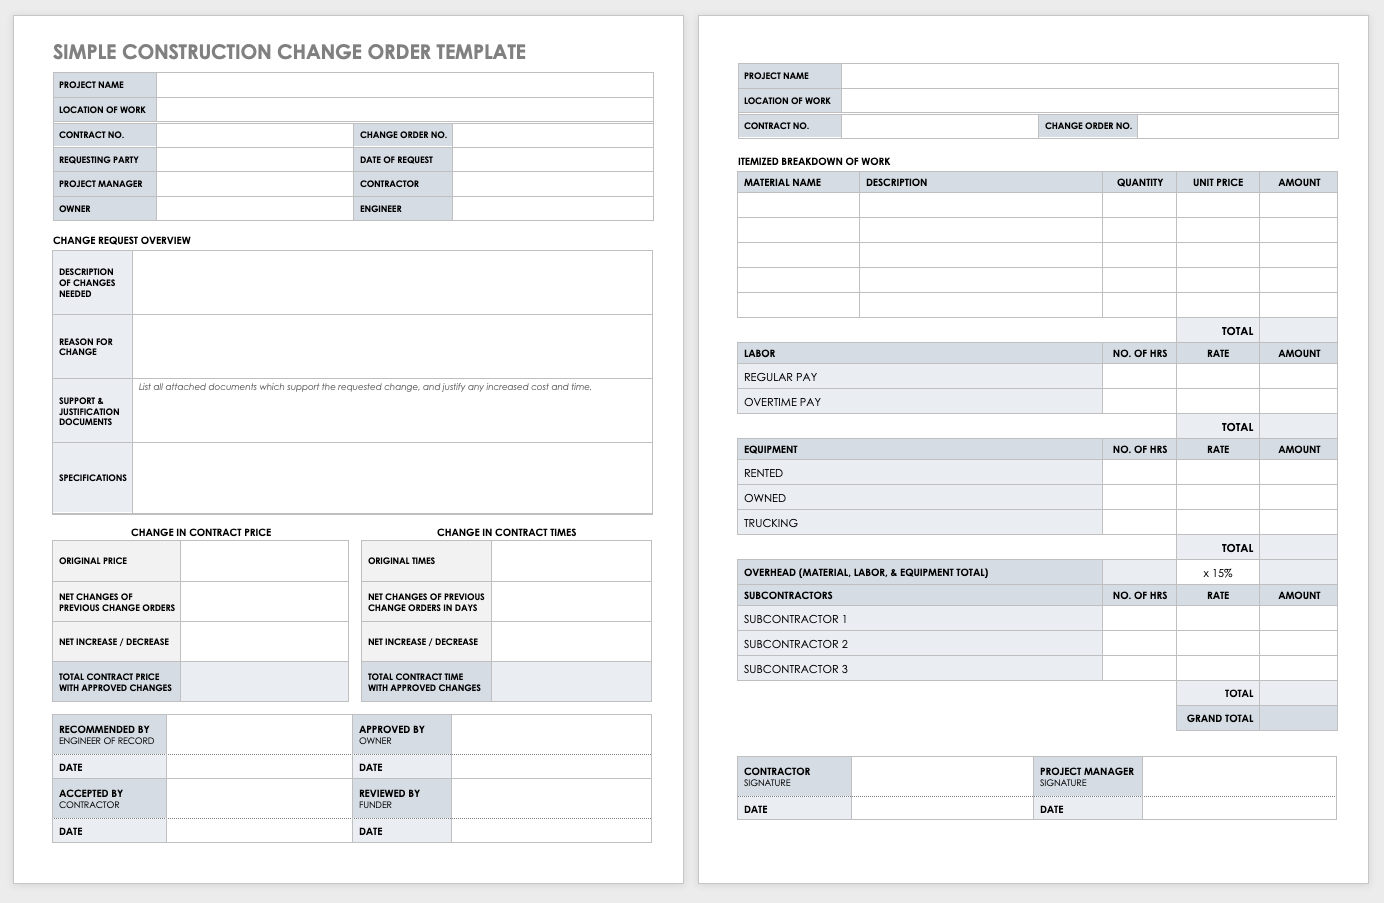 Simple Construction Change Order Template